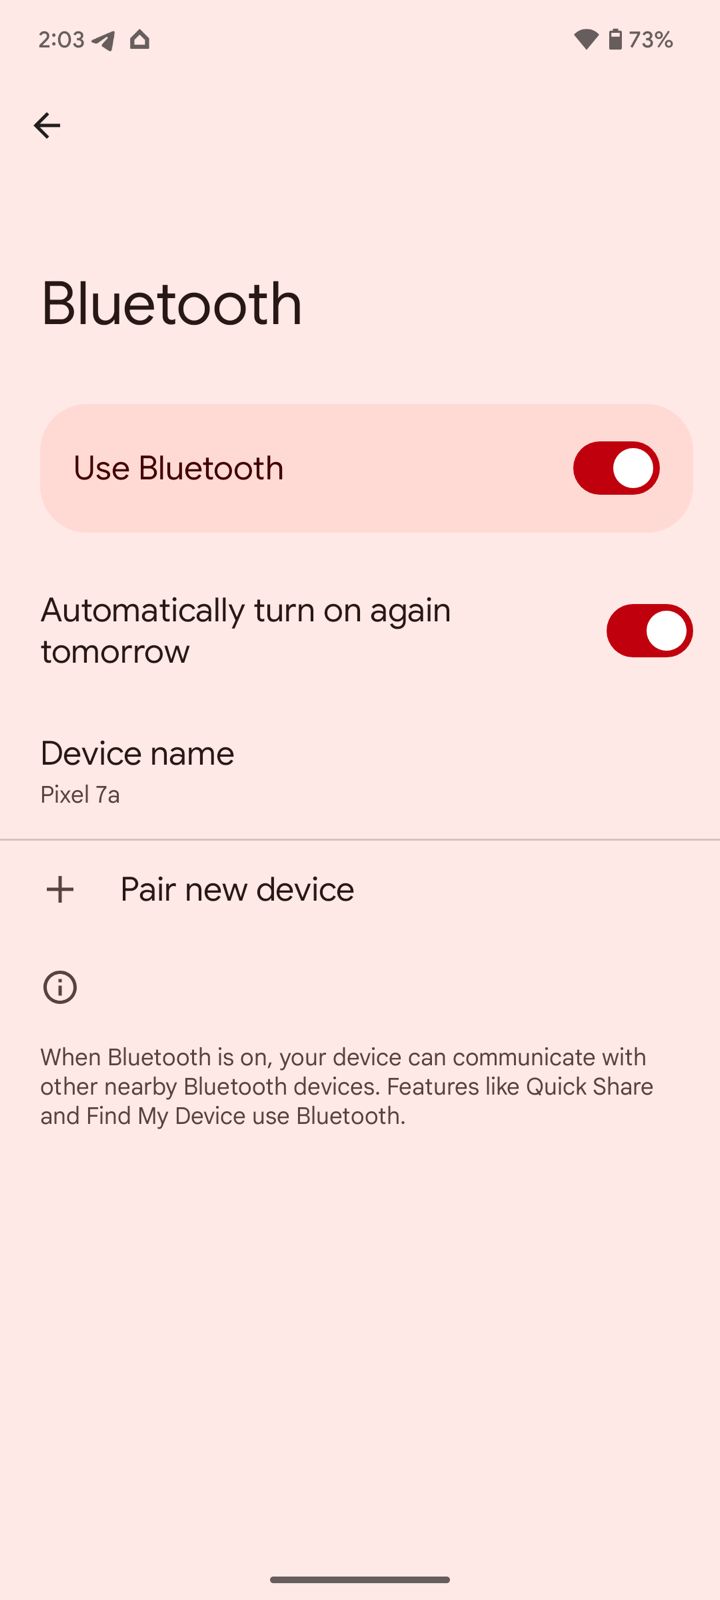 If a user turns off Bluetooth in the Quick Settings